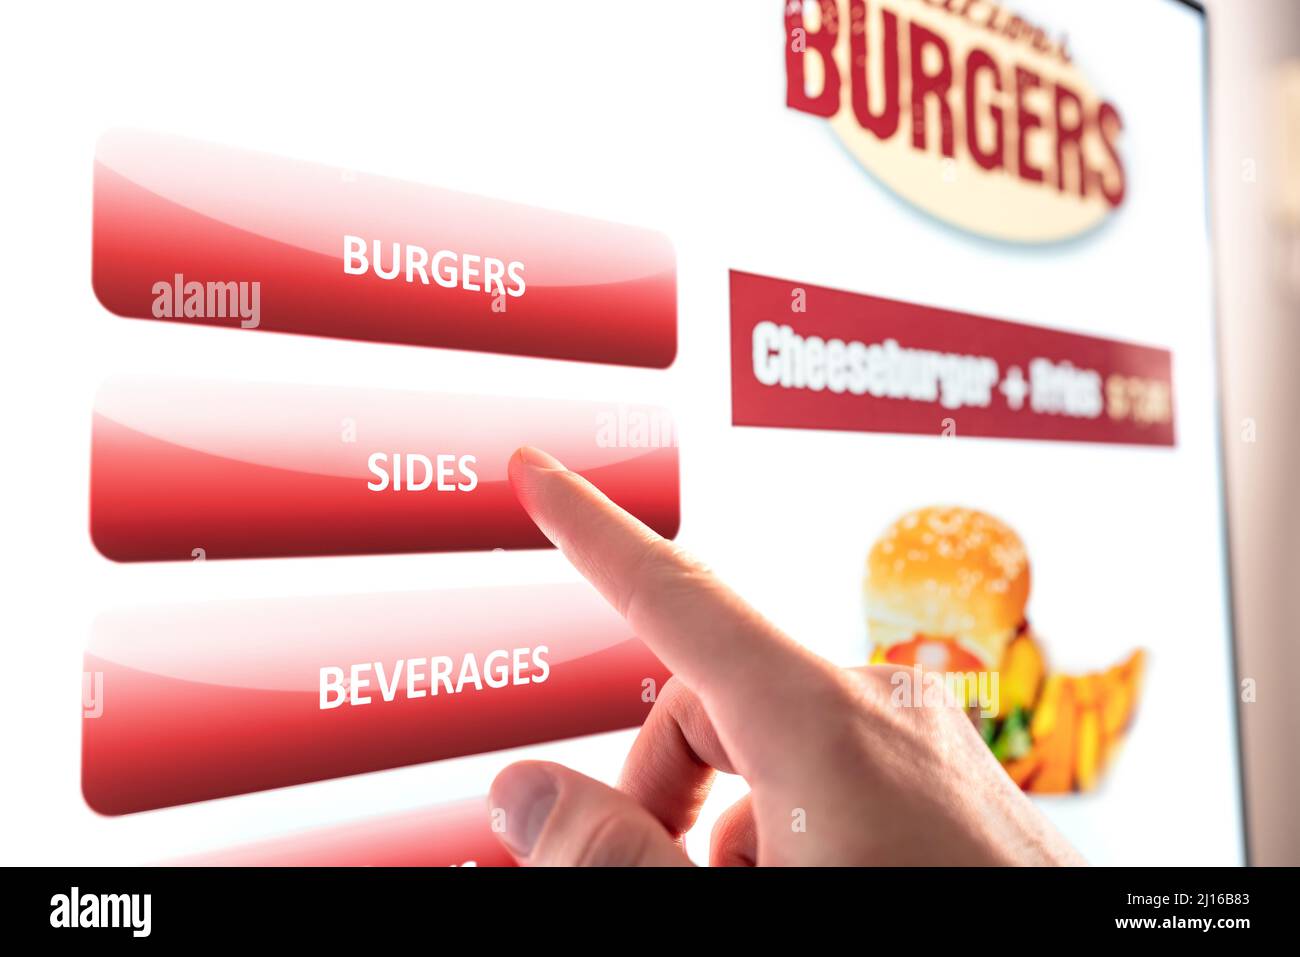 Self service and order kiosk in restaurant. Fast food touch screen, digital vending machine. Man using electronic menu and buying burger meal. Stock Photo